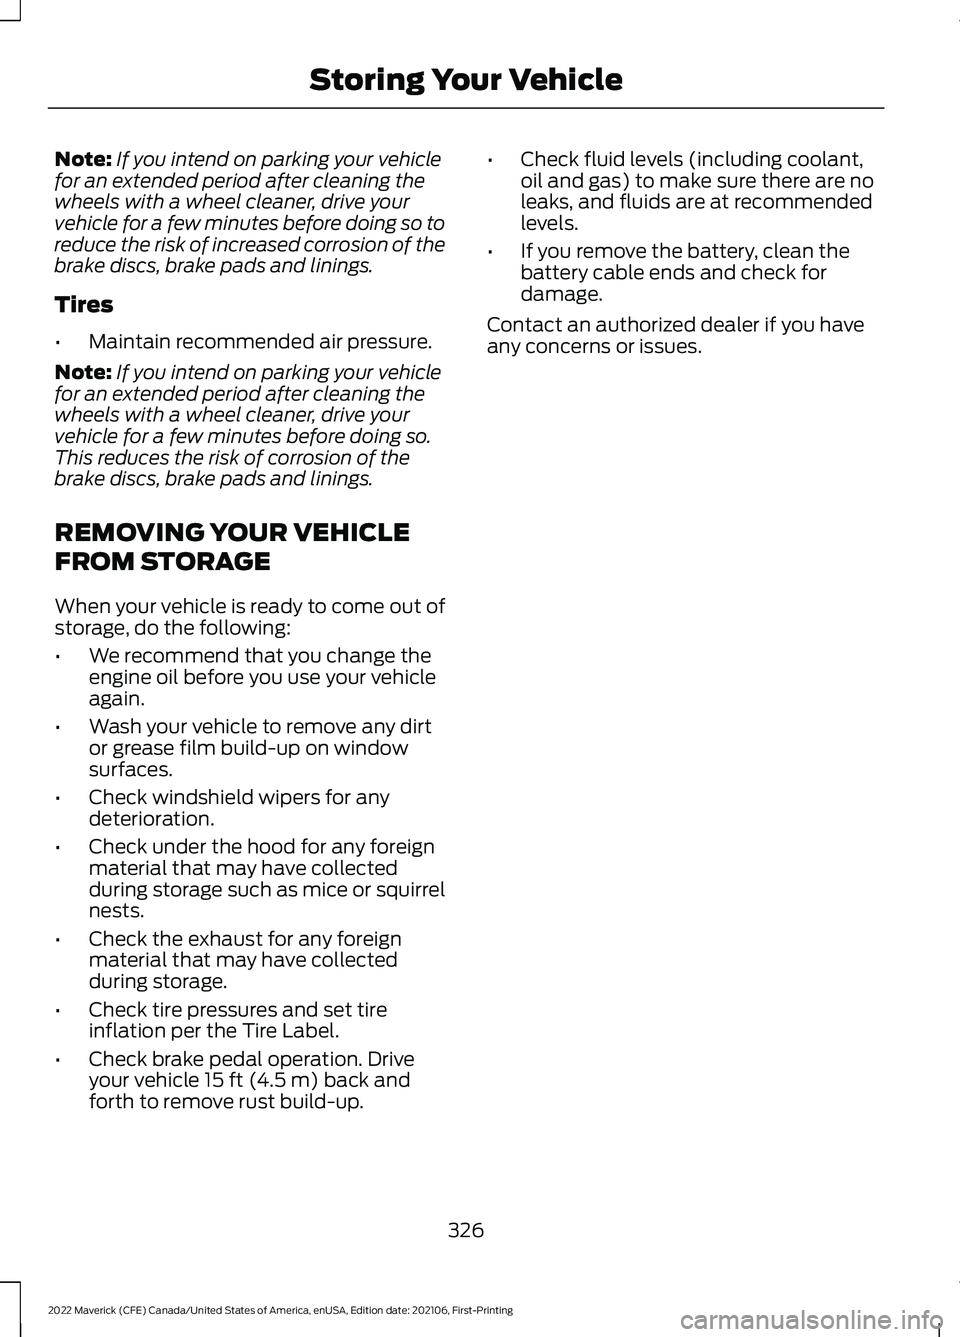 FORD MAVERICK 2022  Owners Manual Note:
If you intend on parking your vehicle
for an extended period after cleaning the
wheels with a wheel cleaner, drive your
vehicle for a few minutes before doing so to
reduce the risk of increased 